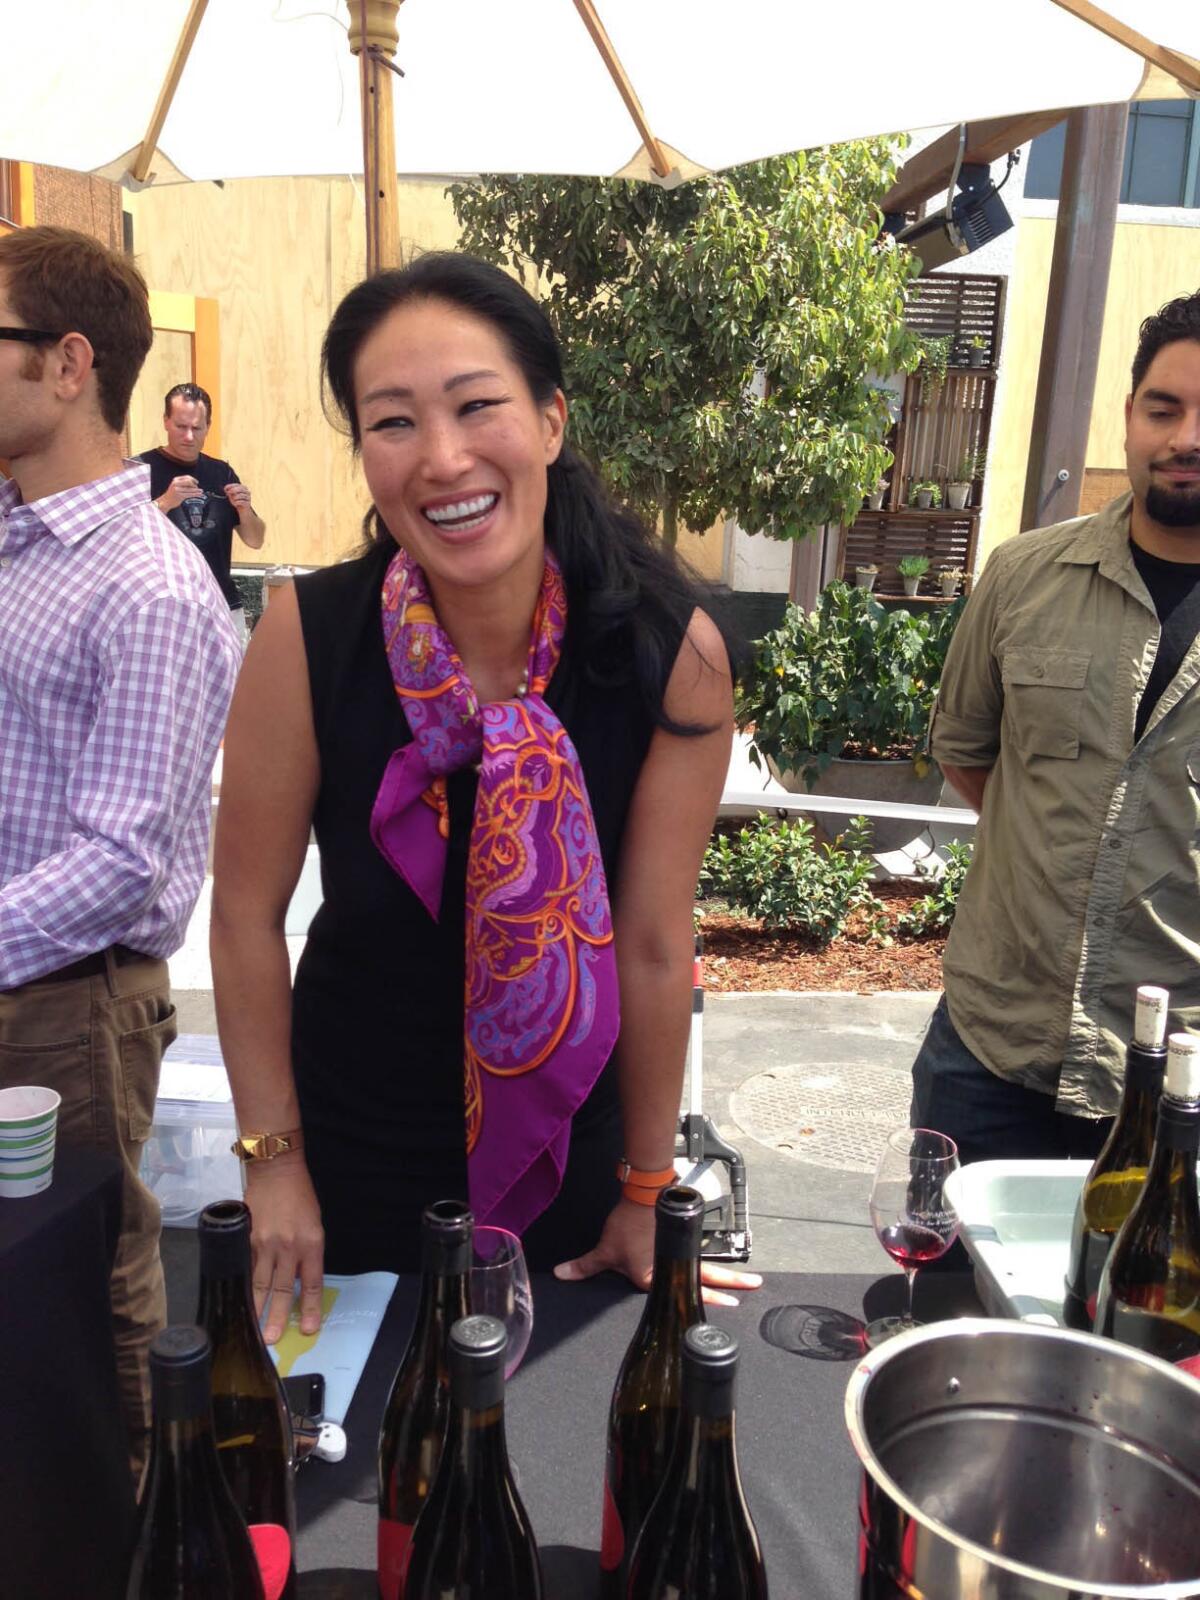 Jenni Bonaccorsi pours her Pinot Noirs at the Santa Barbara County Wine Futures Tasting at the new wine shop and wine bar Les Marchands in Santa Barbara's Funk Zone.